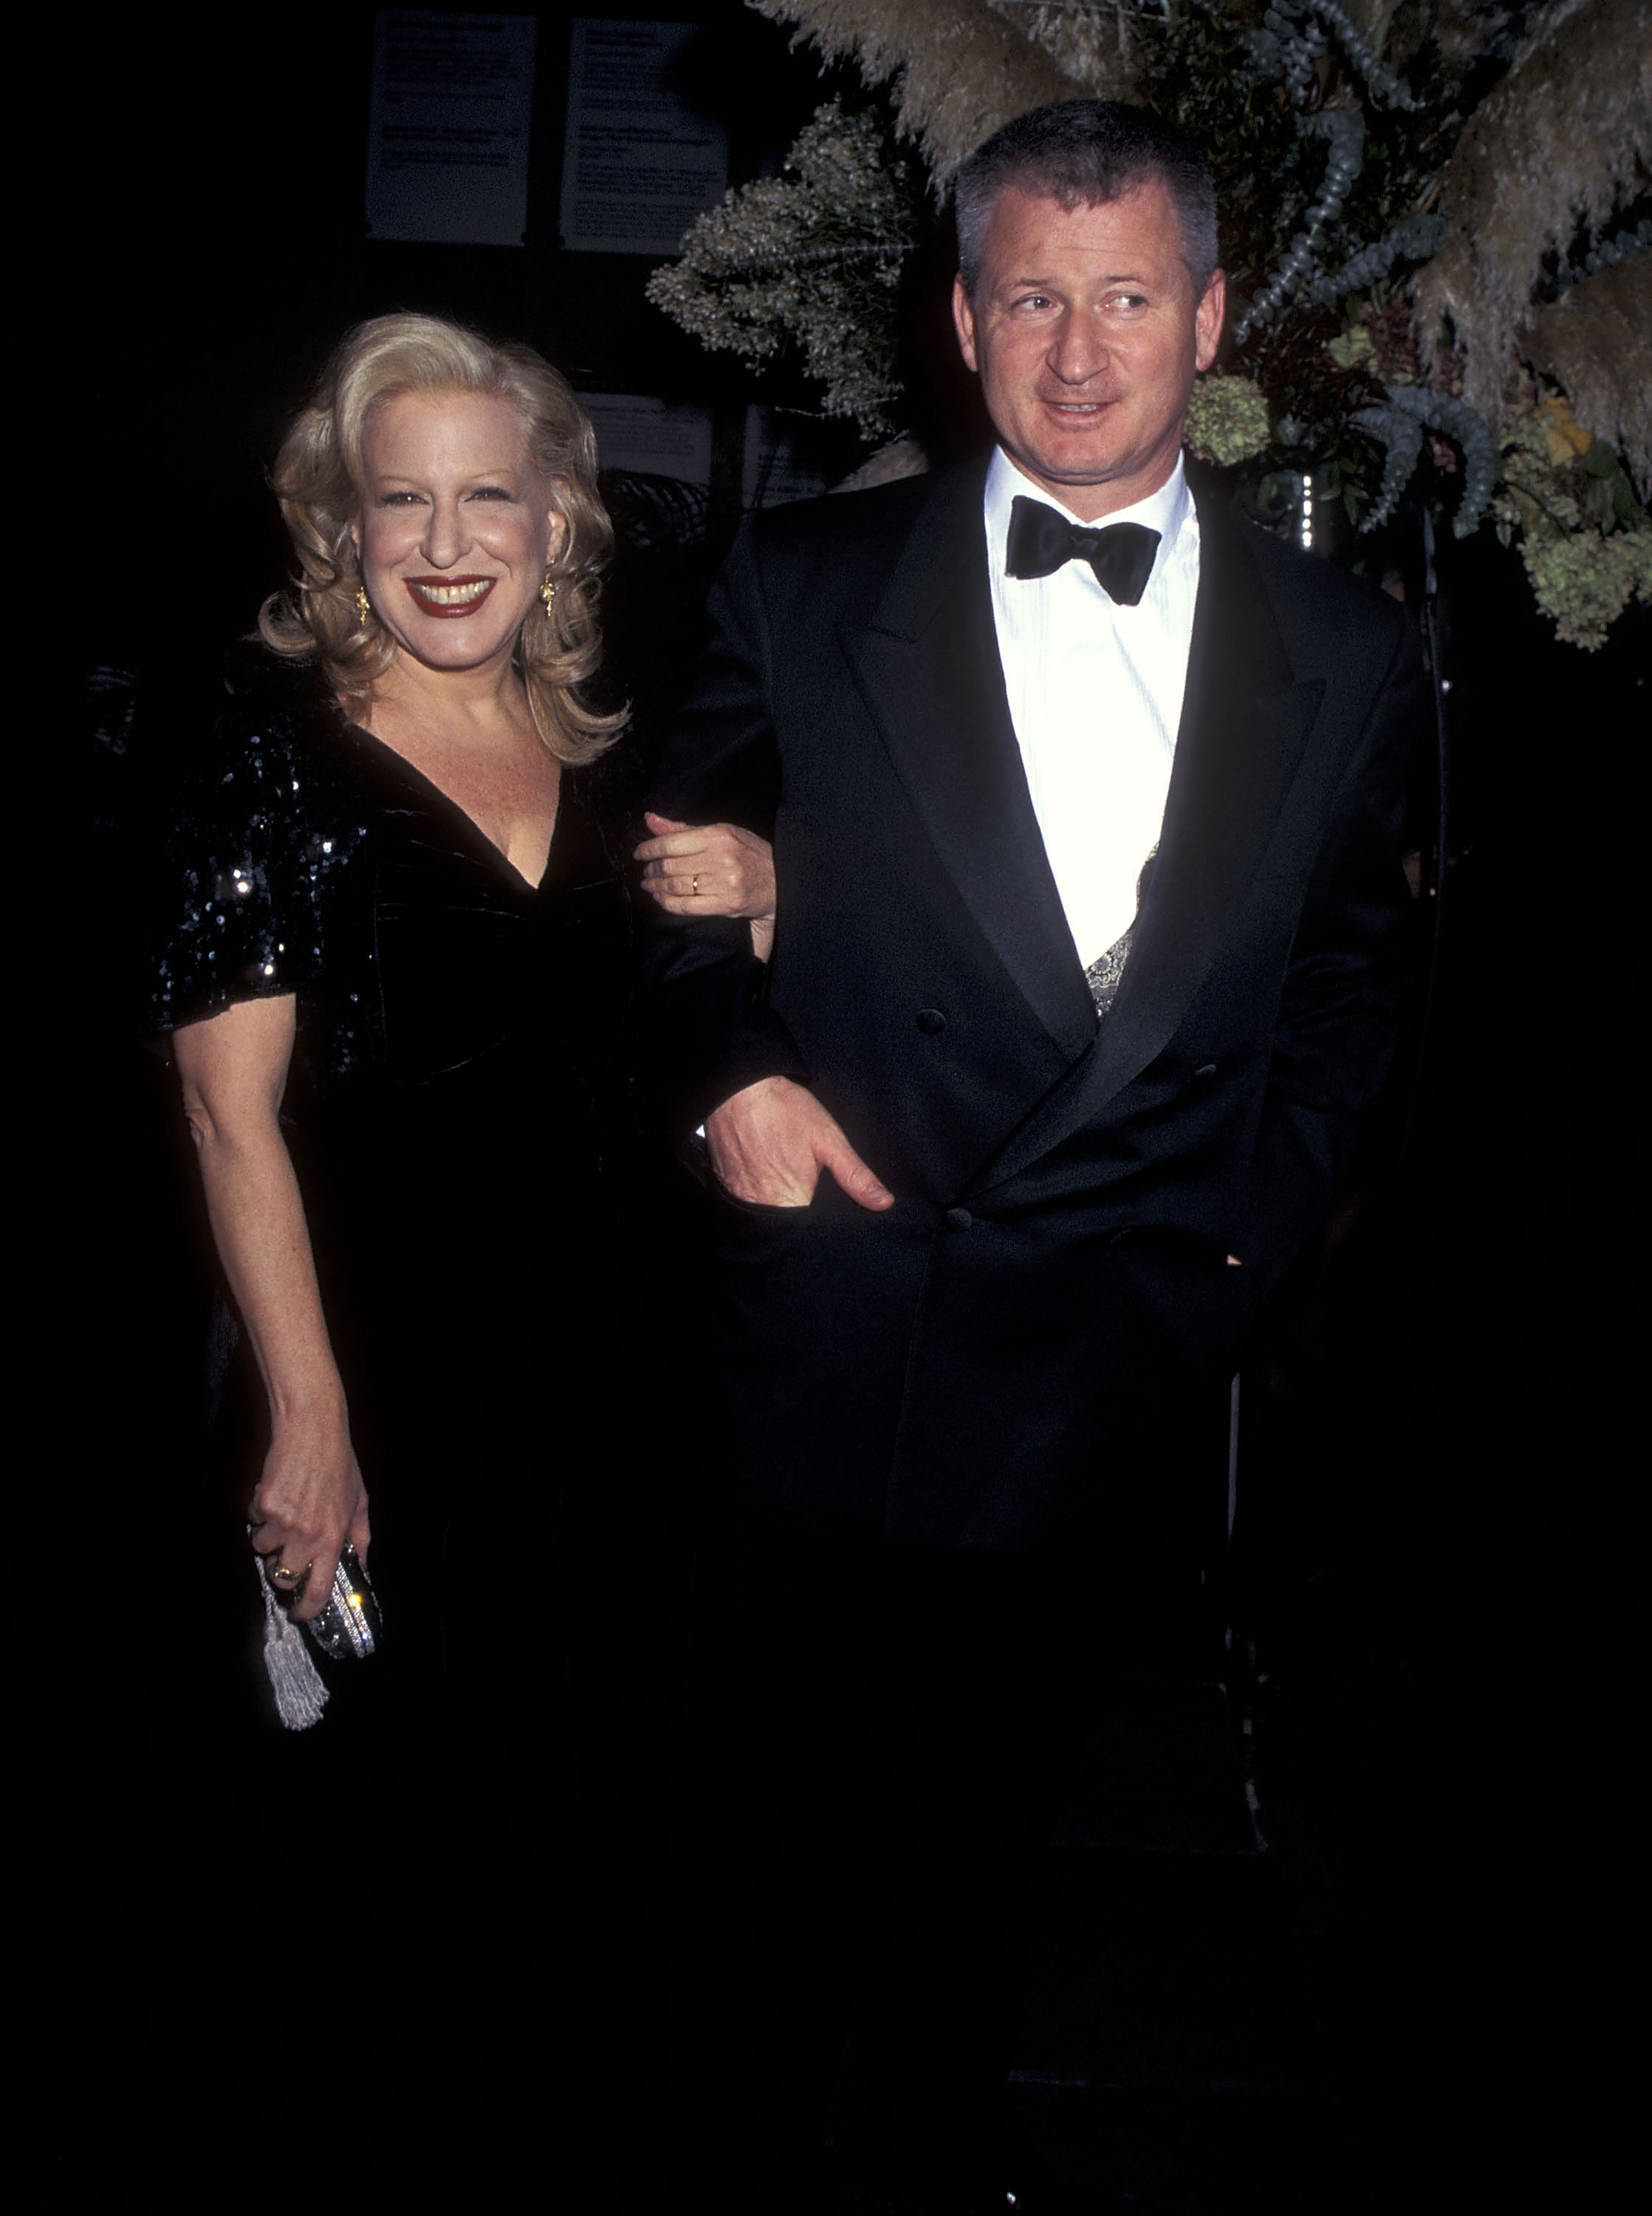 Bette Midler and Martin von Haselberg at the "Manhattan Fantastica" Themed Dinner Dance Gala in New York City, 1995 | Source: Getty Images